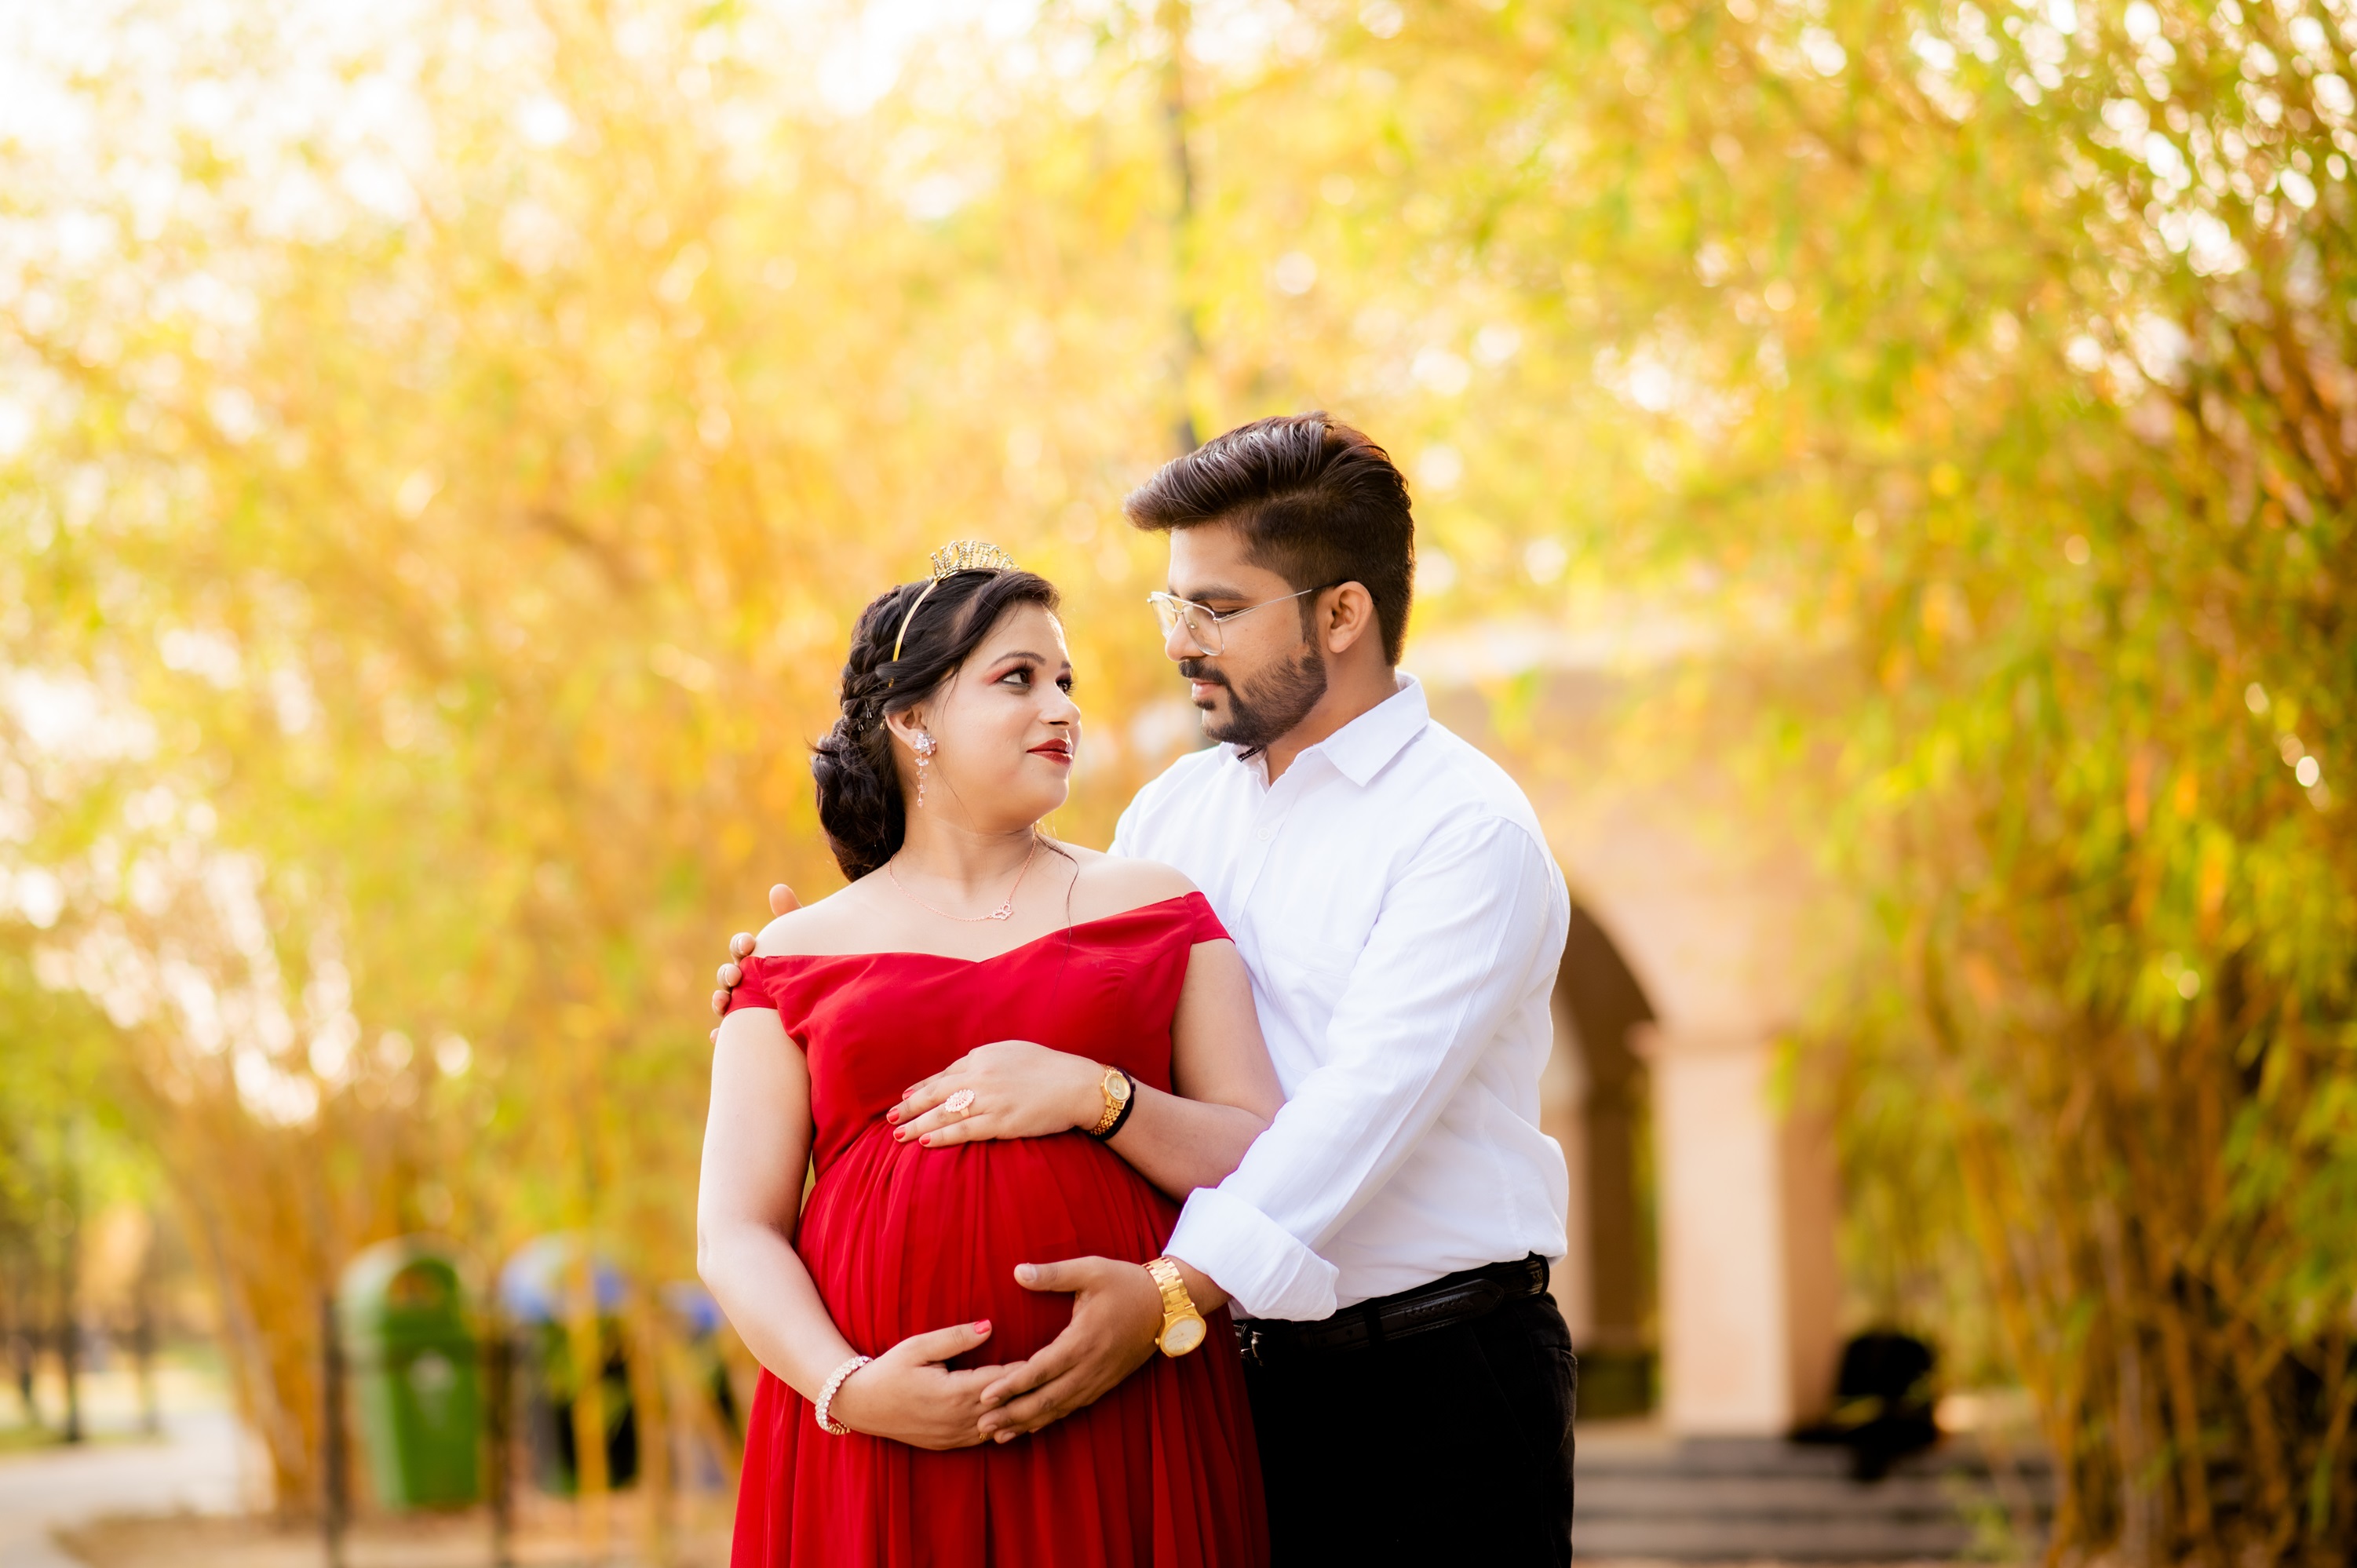 Maternity Shoot in Early Morning